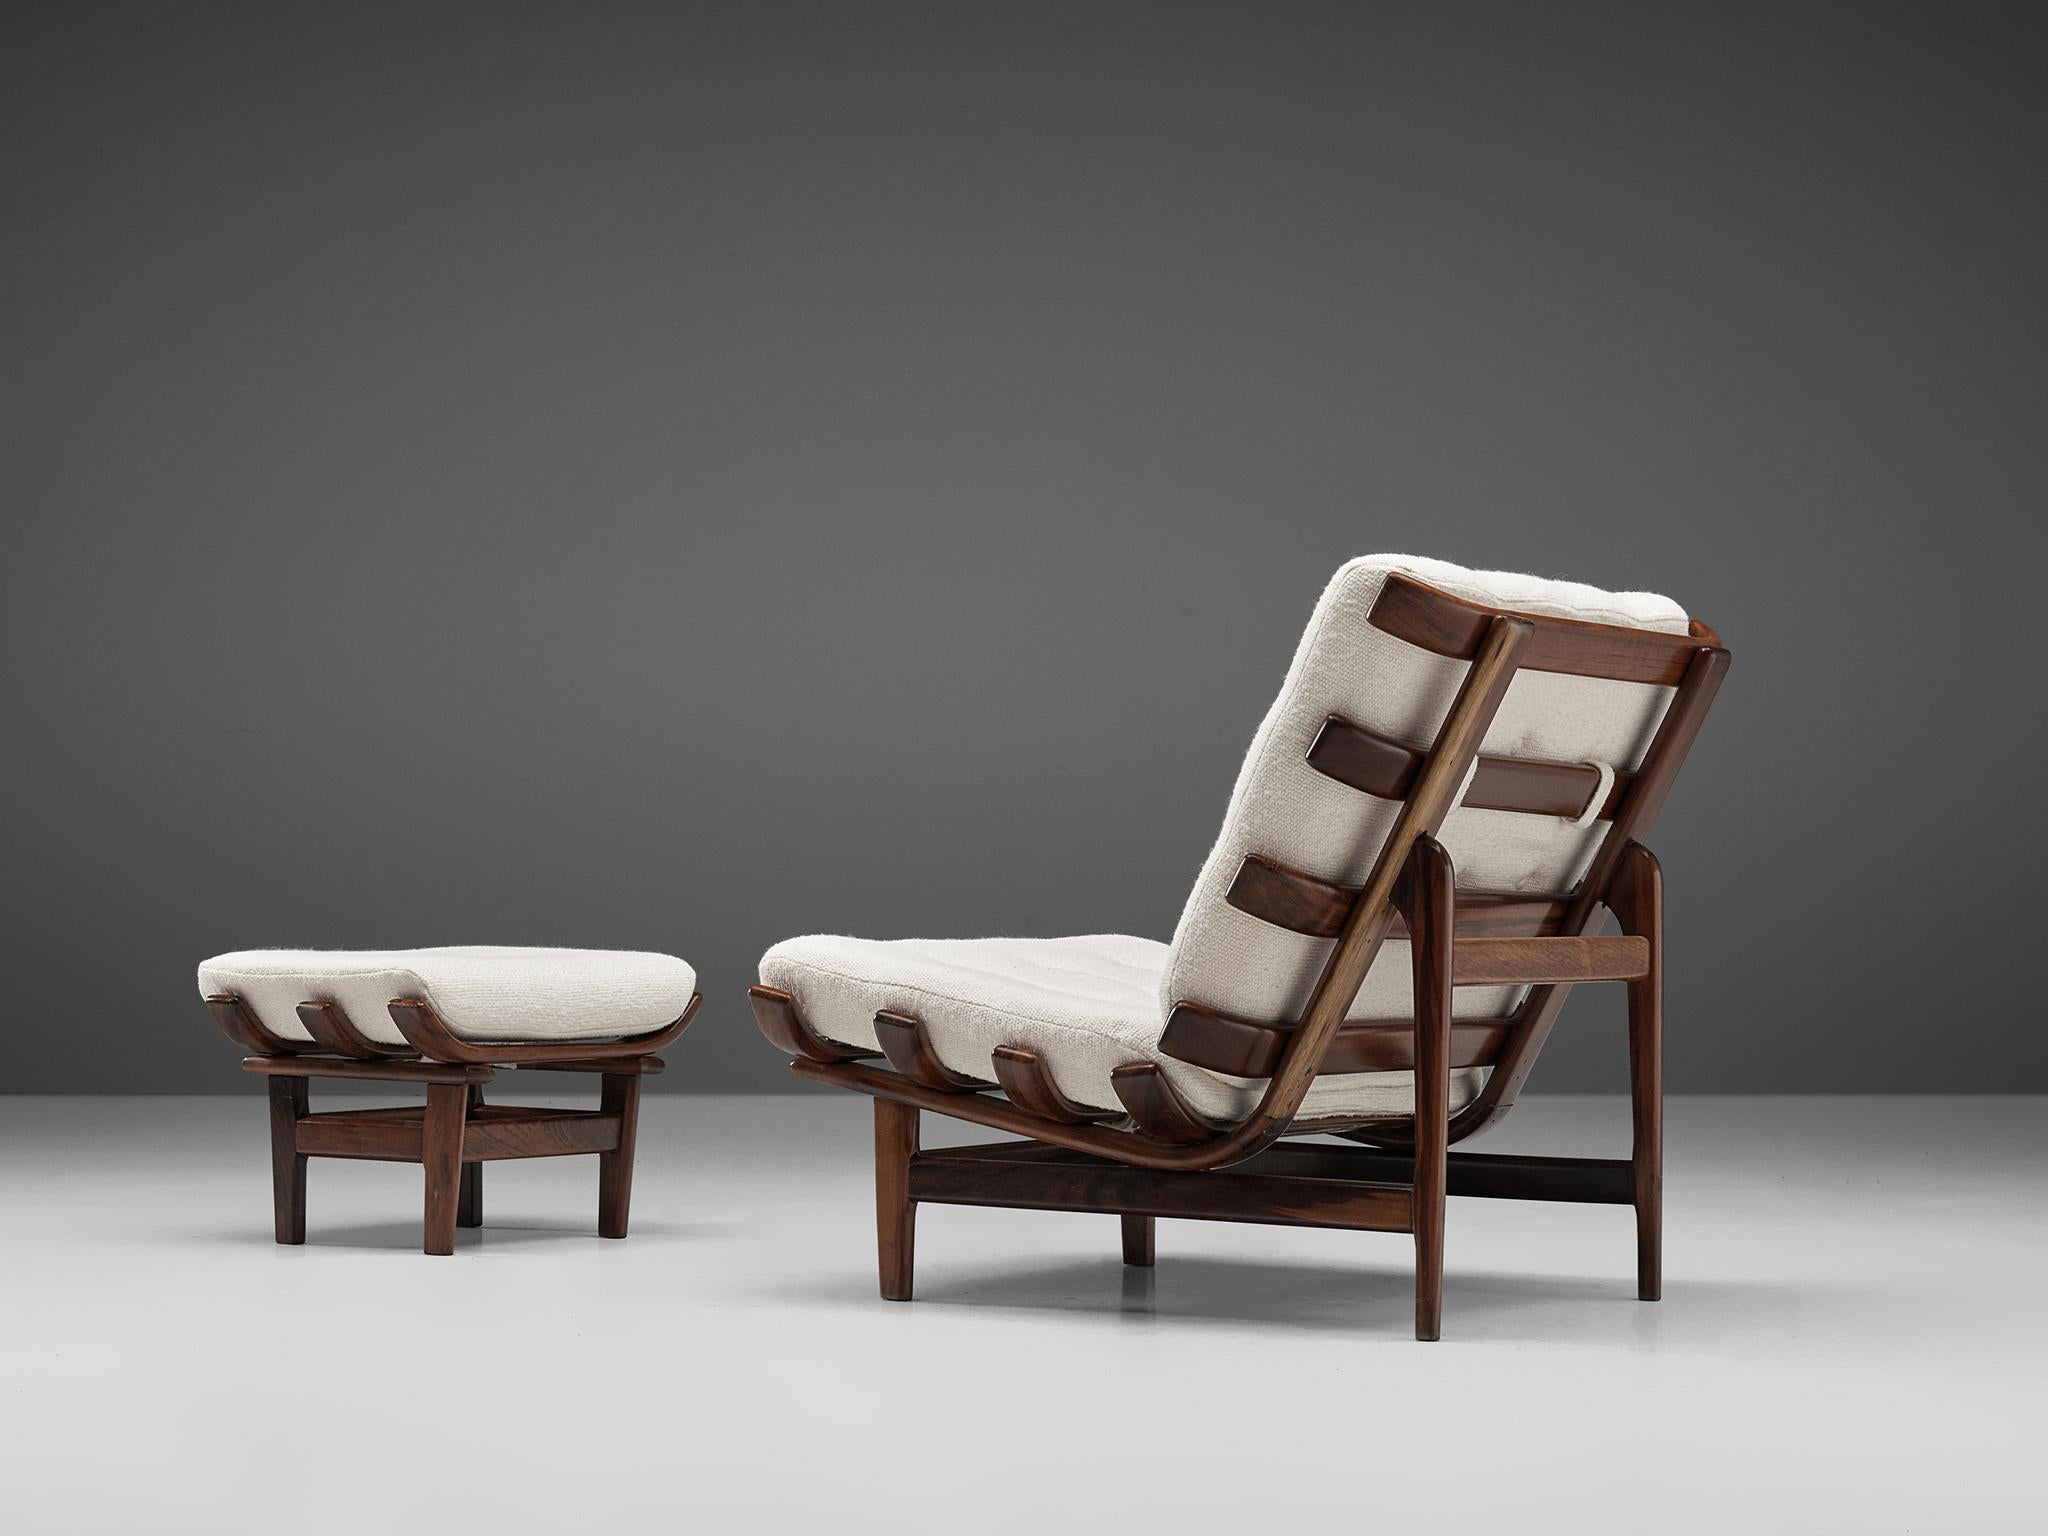 Bone lounge chair with ottoman, jacaranda wood, Brazil, 1960s. 

Brazilian 'Bone' chair, an iconic design for Brazilian Mid-Century Modern, from the 1960s. This particular piece is completely executed in jacaranda wood. These are straight in the